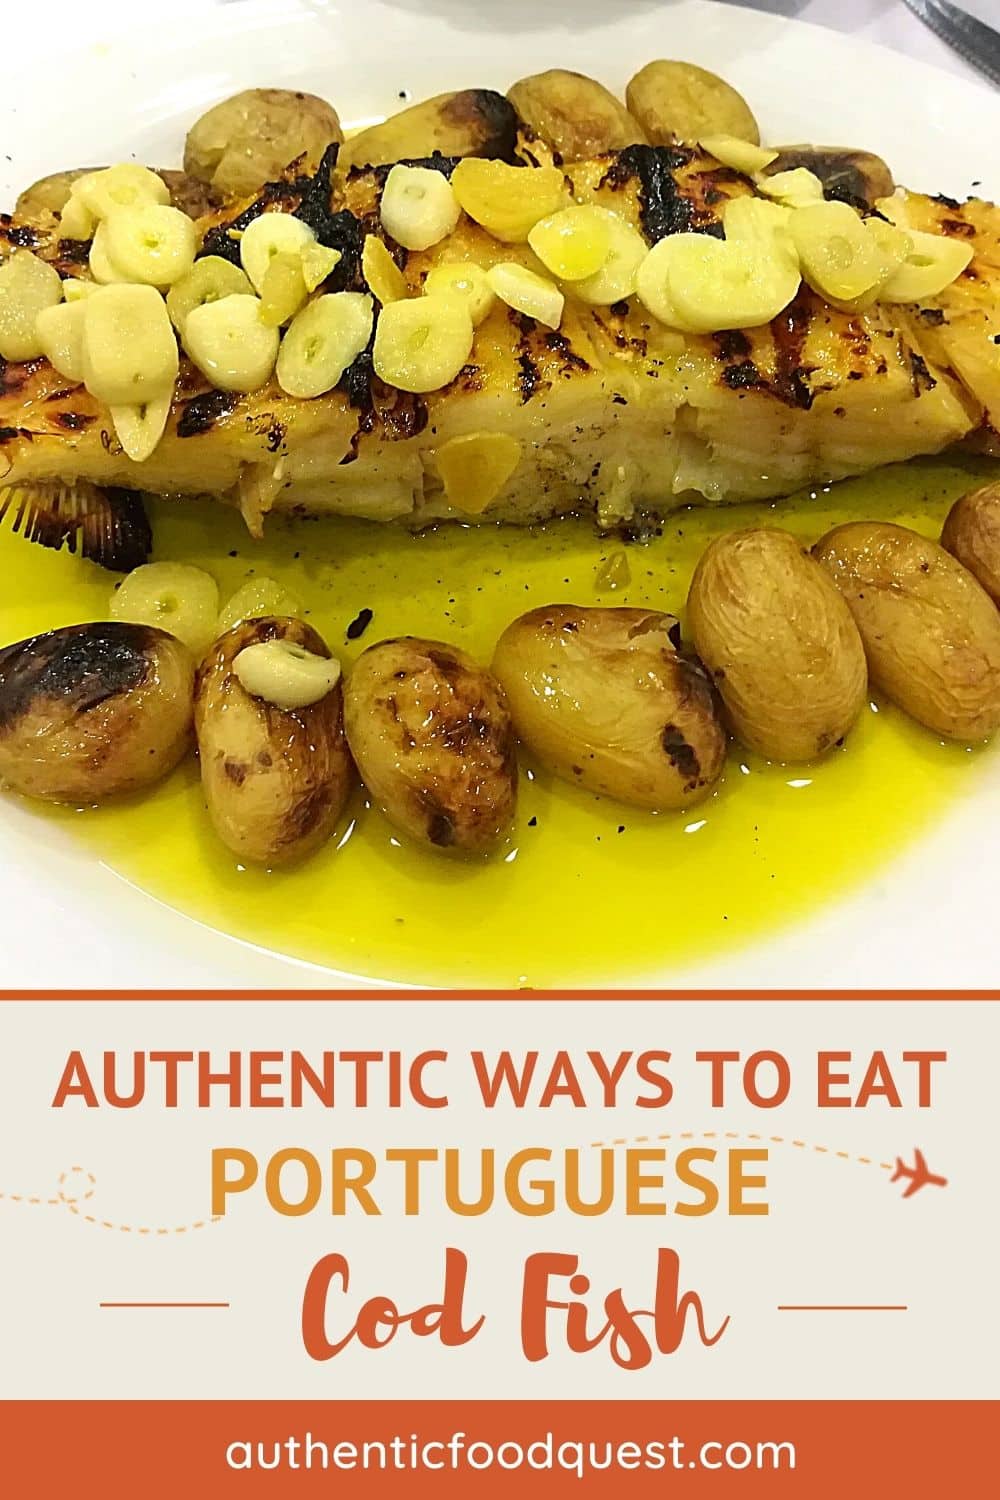 7 Authentic Ways You Want To Eat Bacalhau The Portuguese Way (With Recipes)